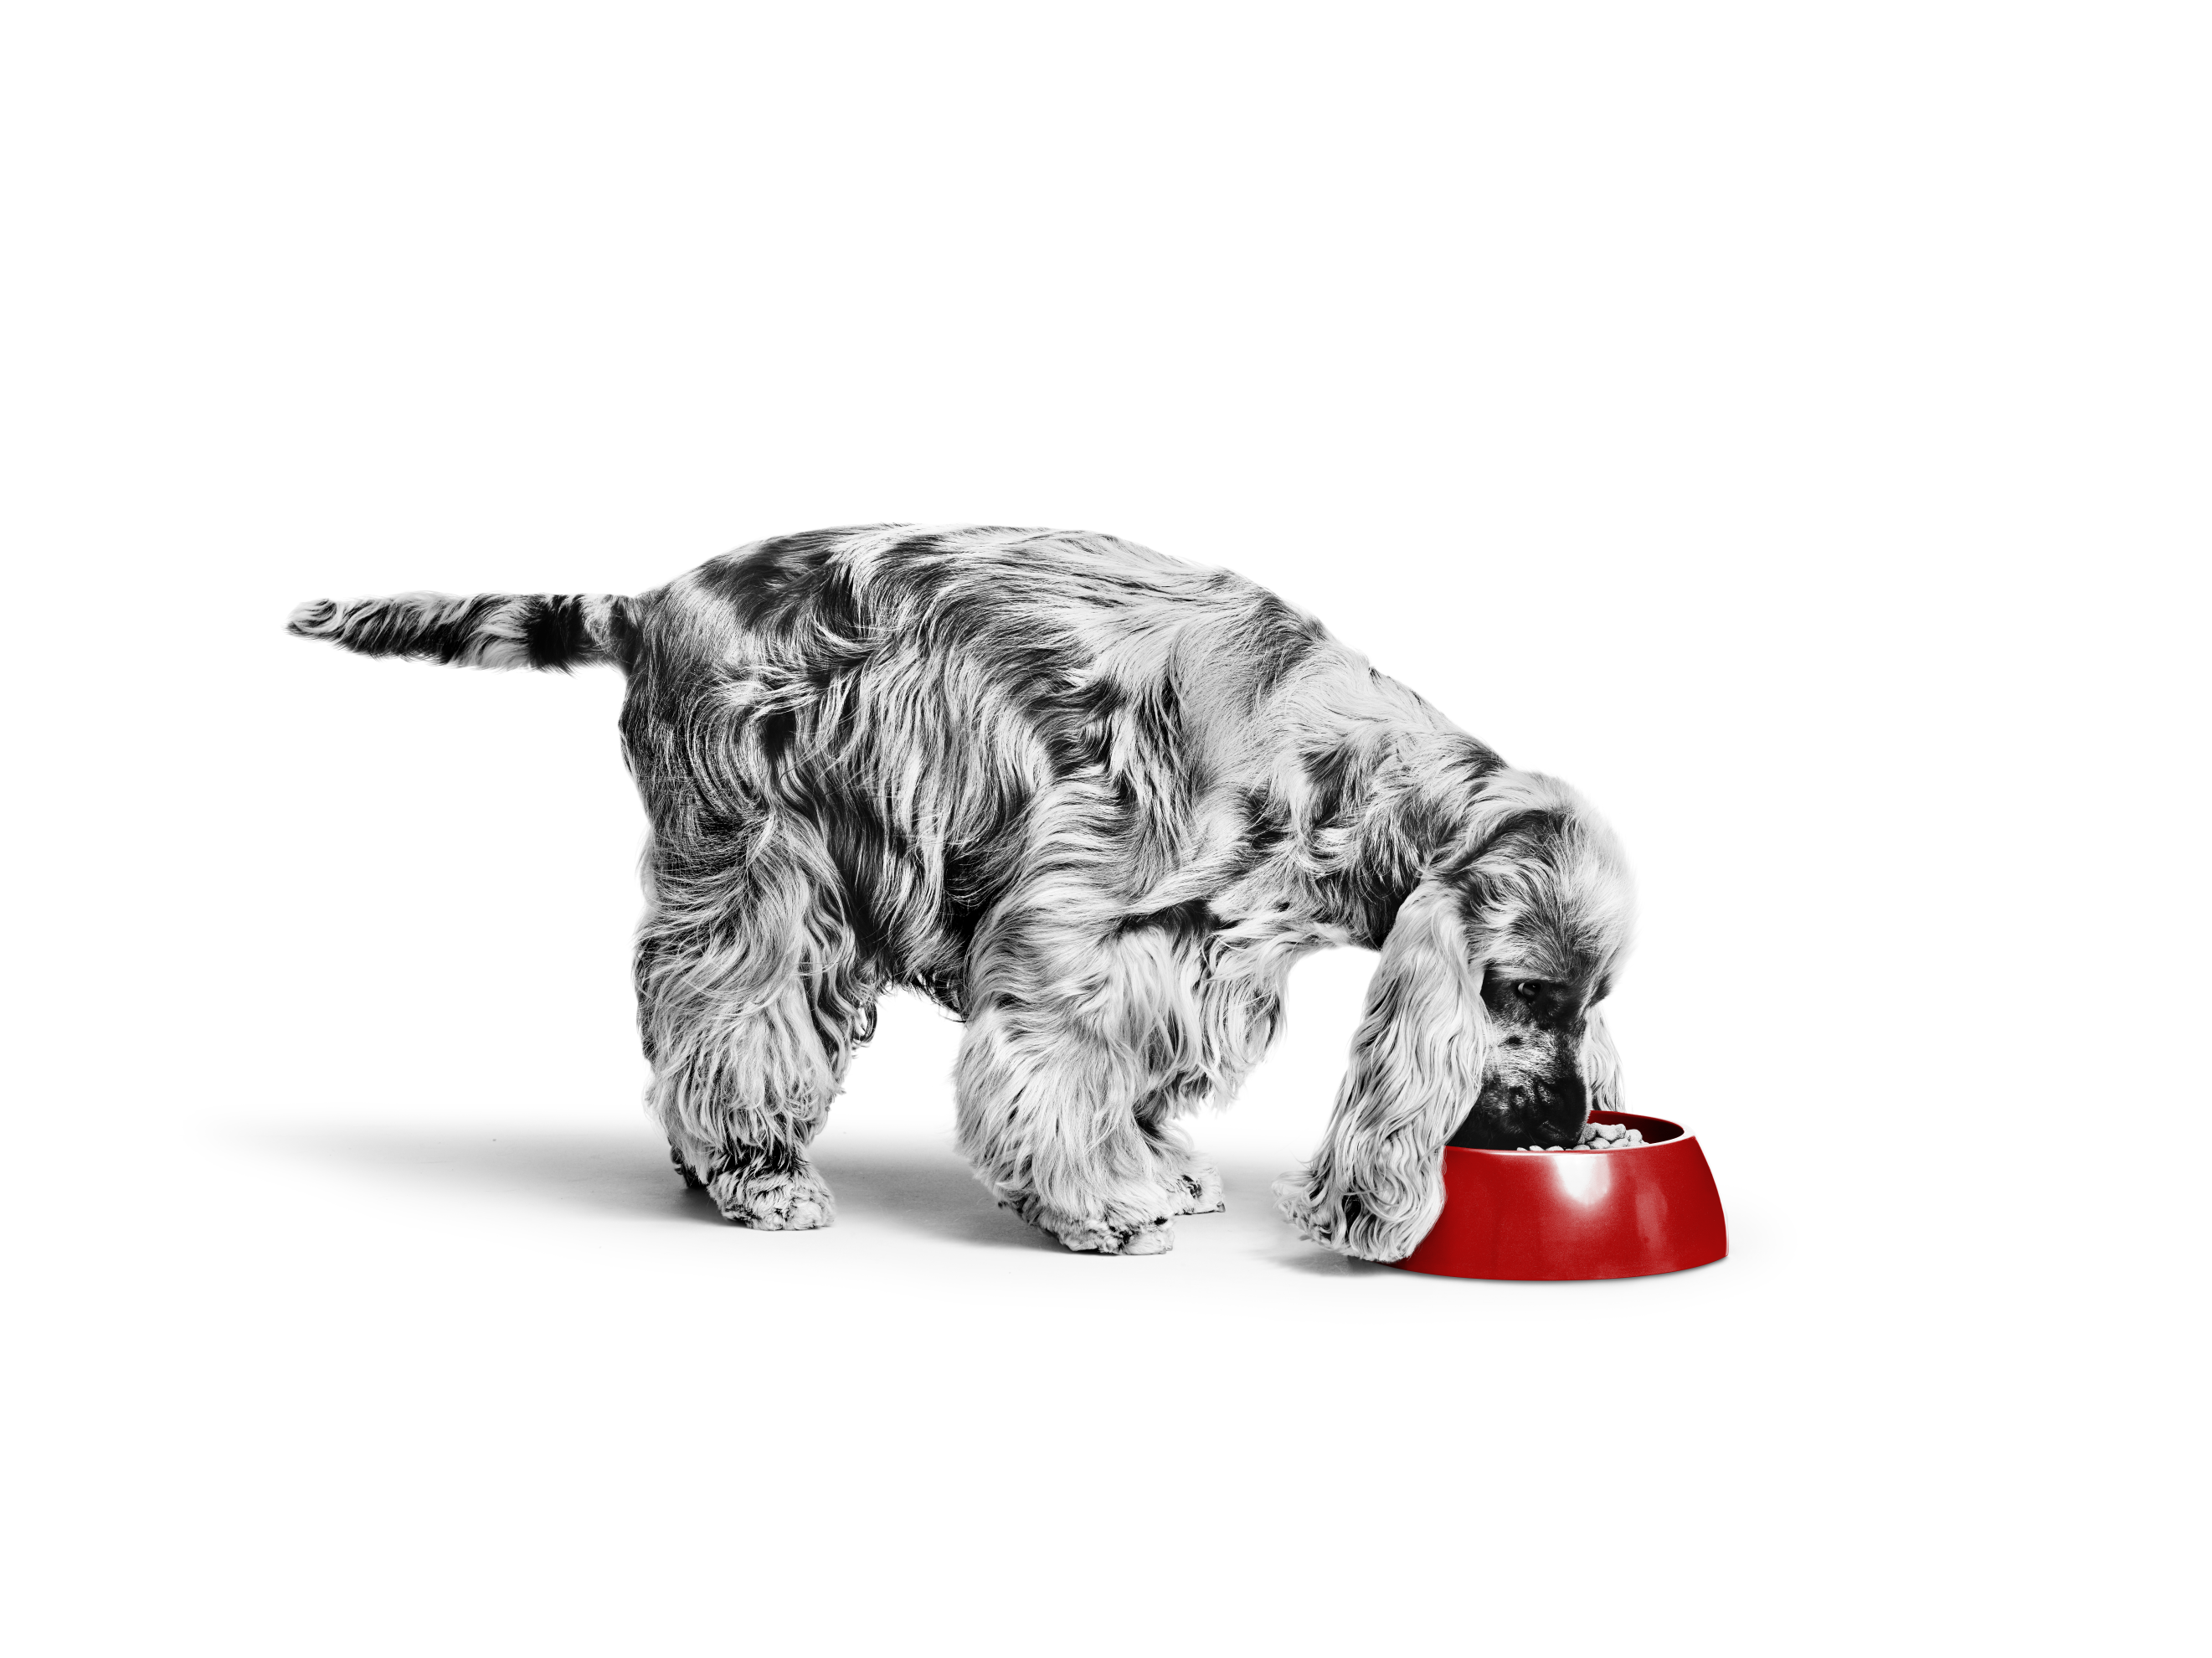 Black and white English Cocker Spaniel eating from a red bowl